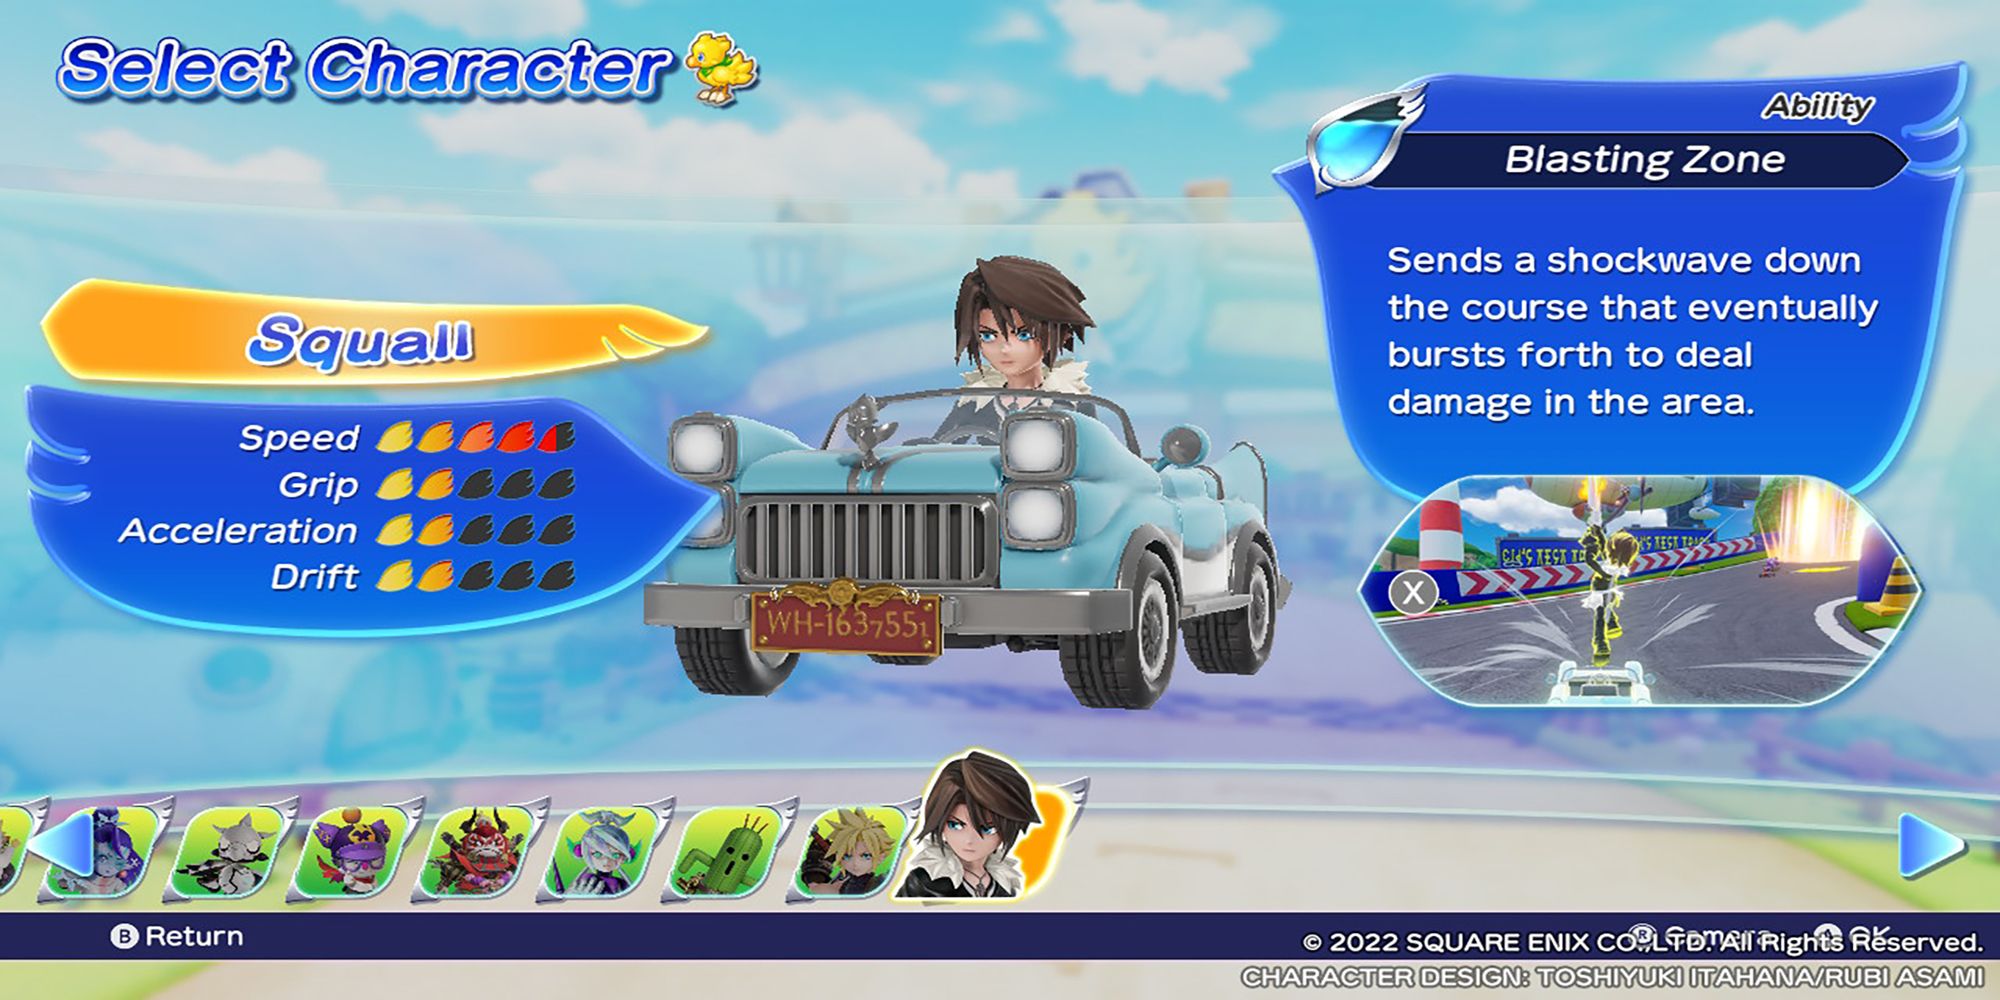 Squall's character model, along with his stats and abilities, in the Select Character menu. Chocobo GP.